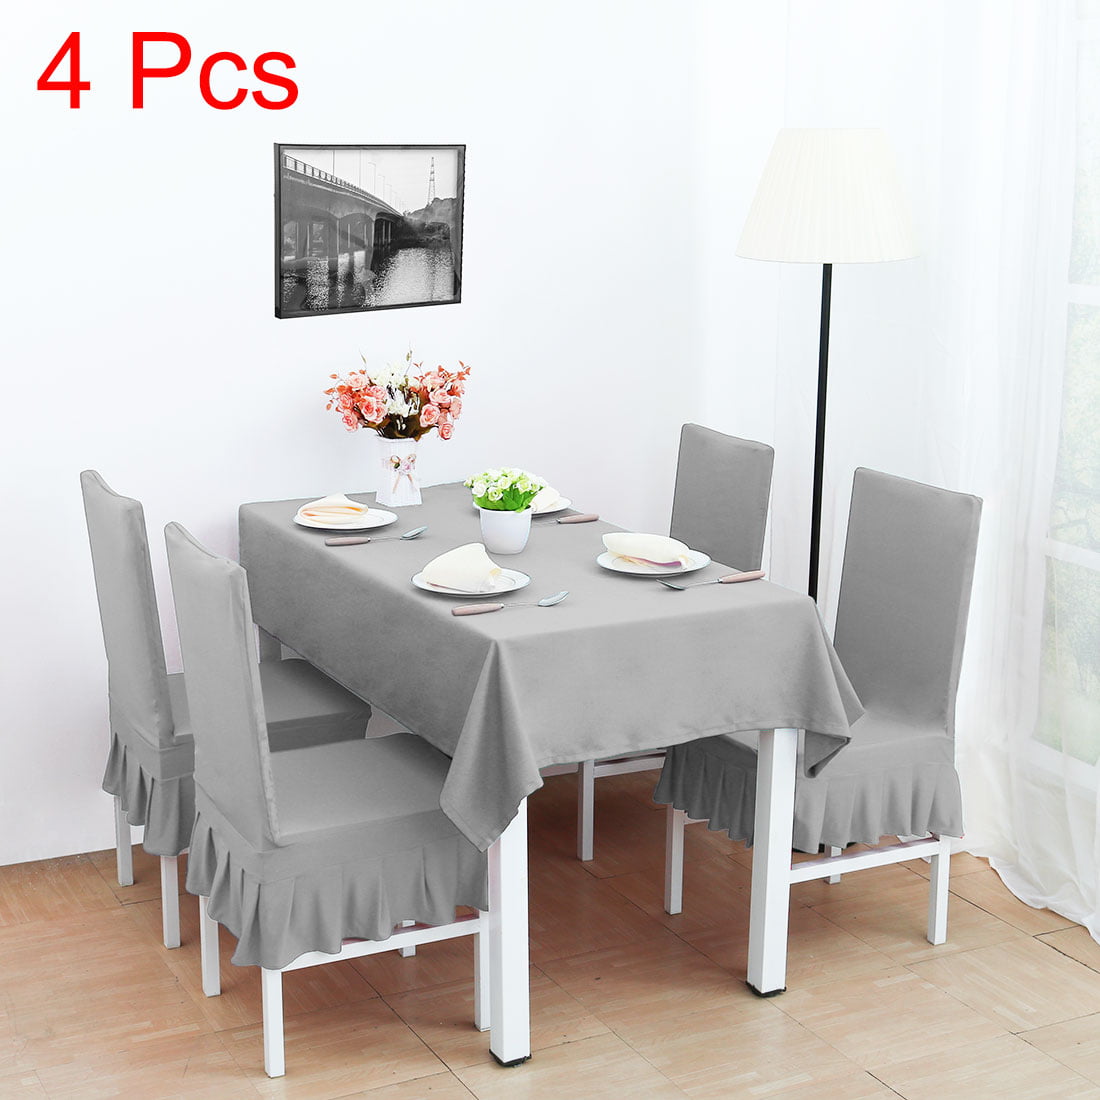 Details about   4pcs Stretch Chair Covers Removable Chair Seat Slipcover Dining Room Protector 